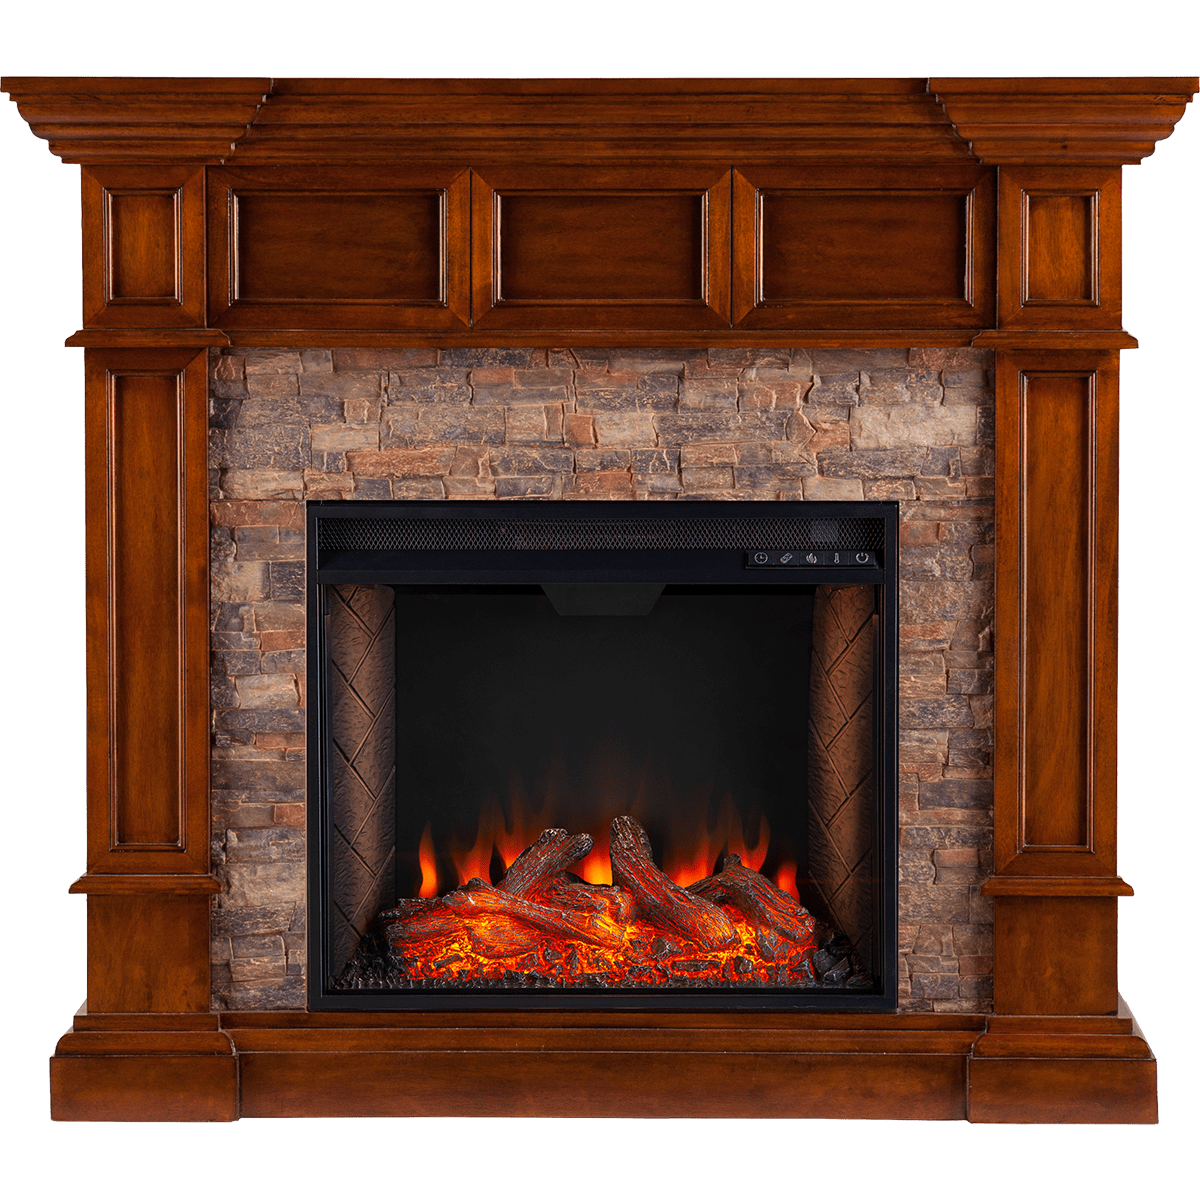 Electric Wall Fireplace Heater Unique southern Enterprises Merrimack Simulated Stone Convertible Electric Fireplace